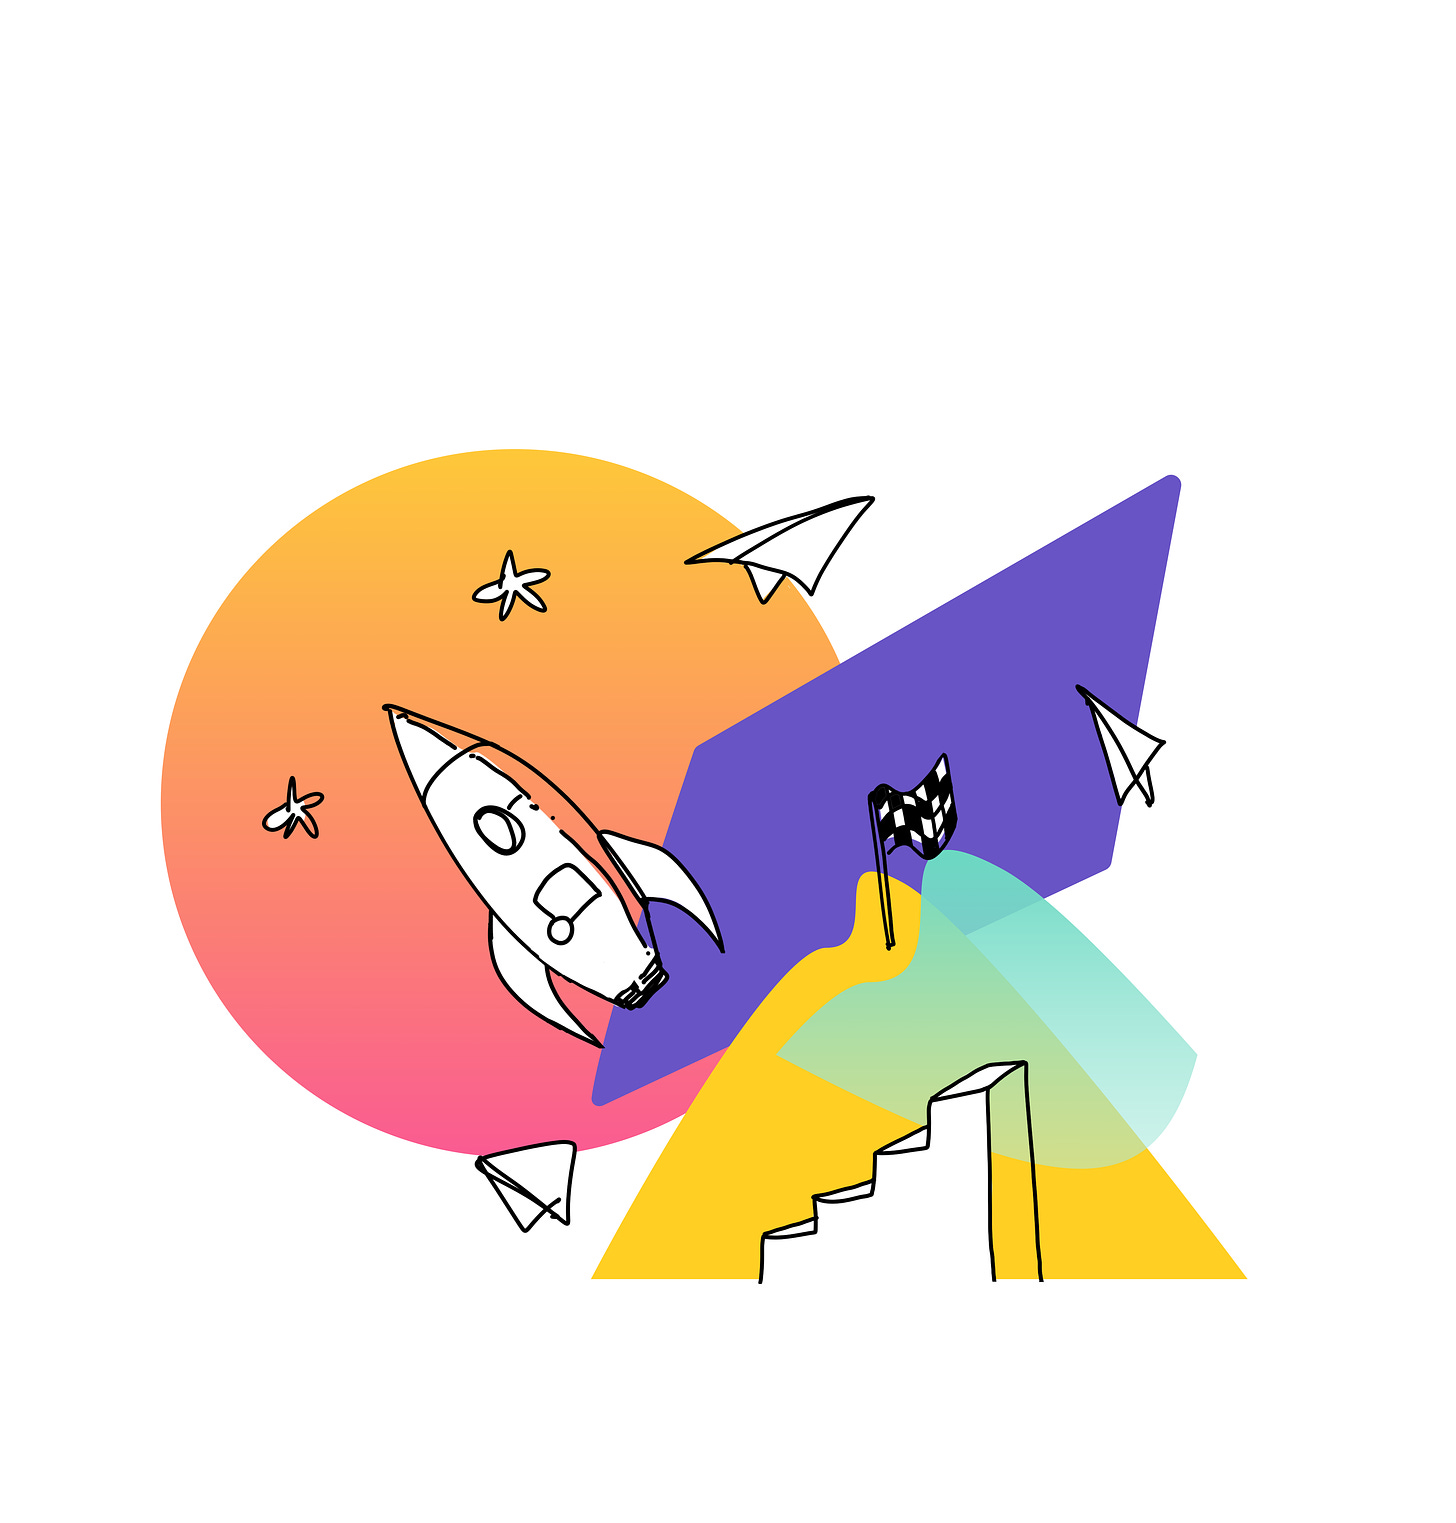 a pop art style illustratoin of a rocket, a mountain, and some paper planes.